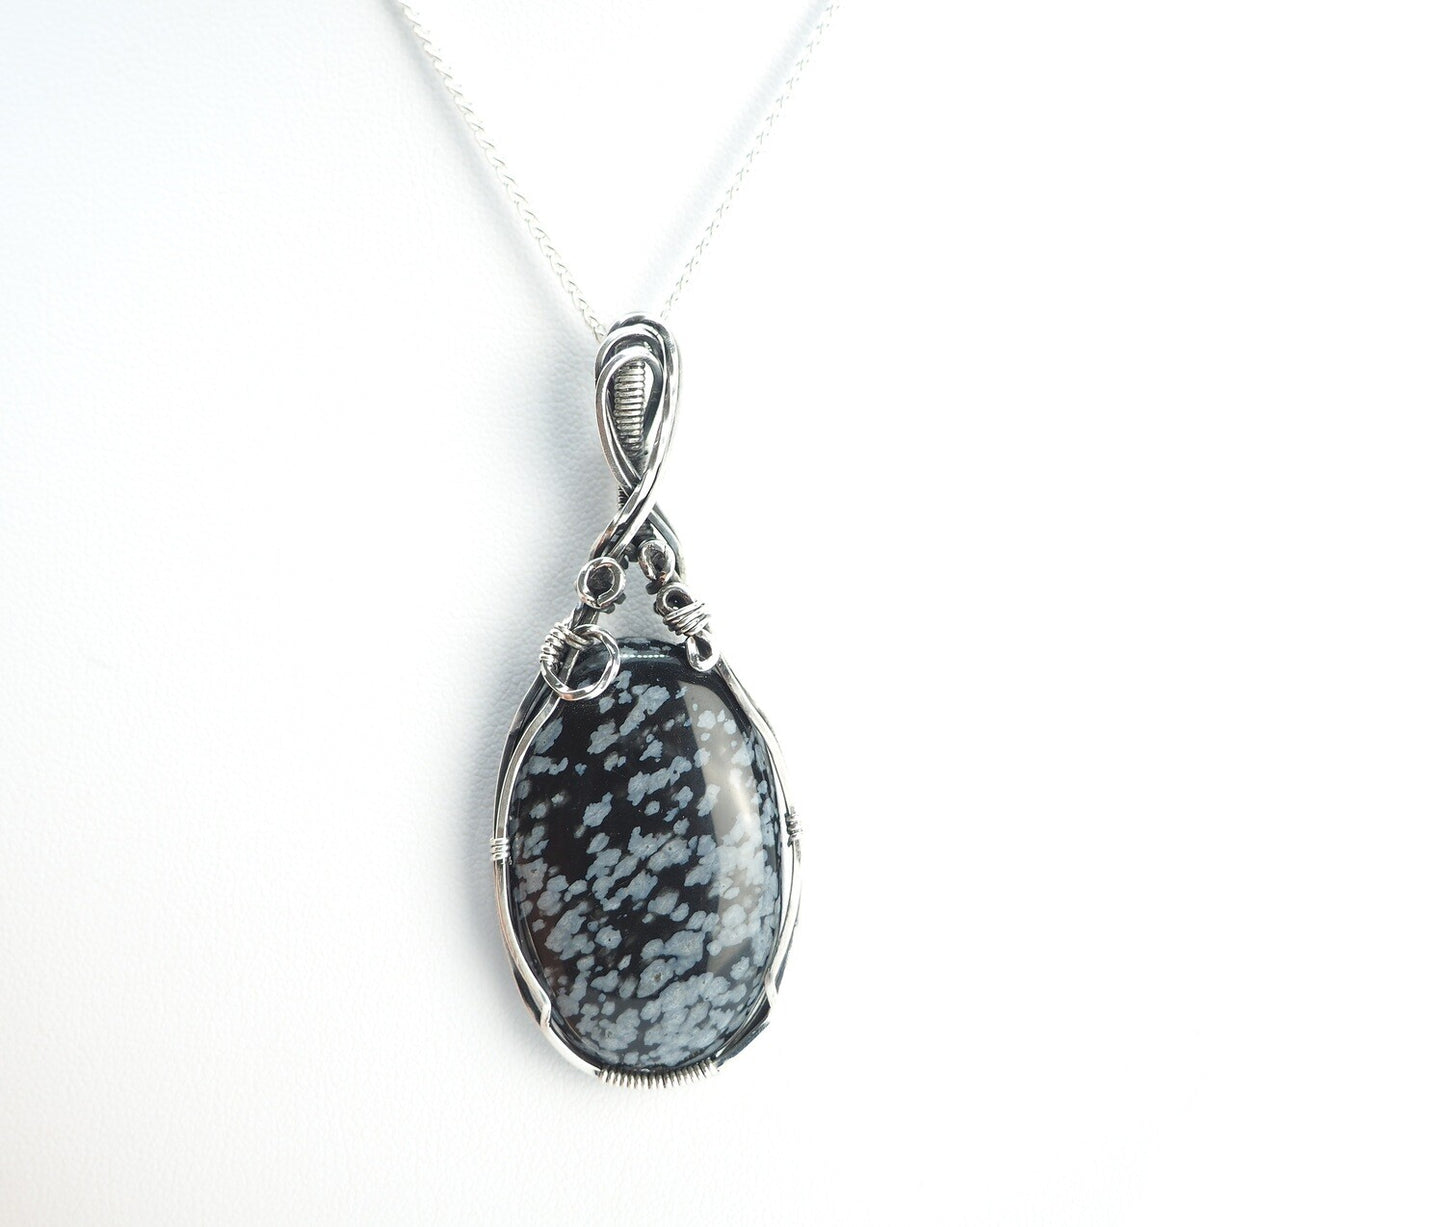 Snowflake Obsidian wrapped in Sterling Silver and Oxidised.